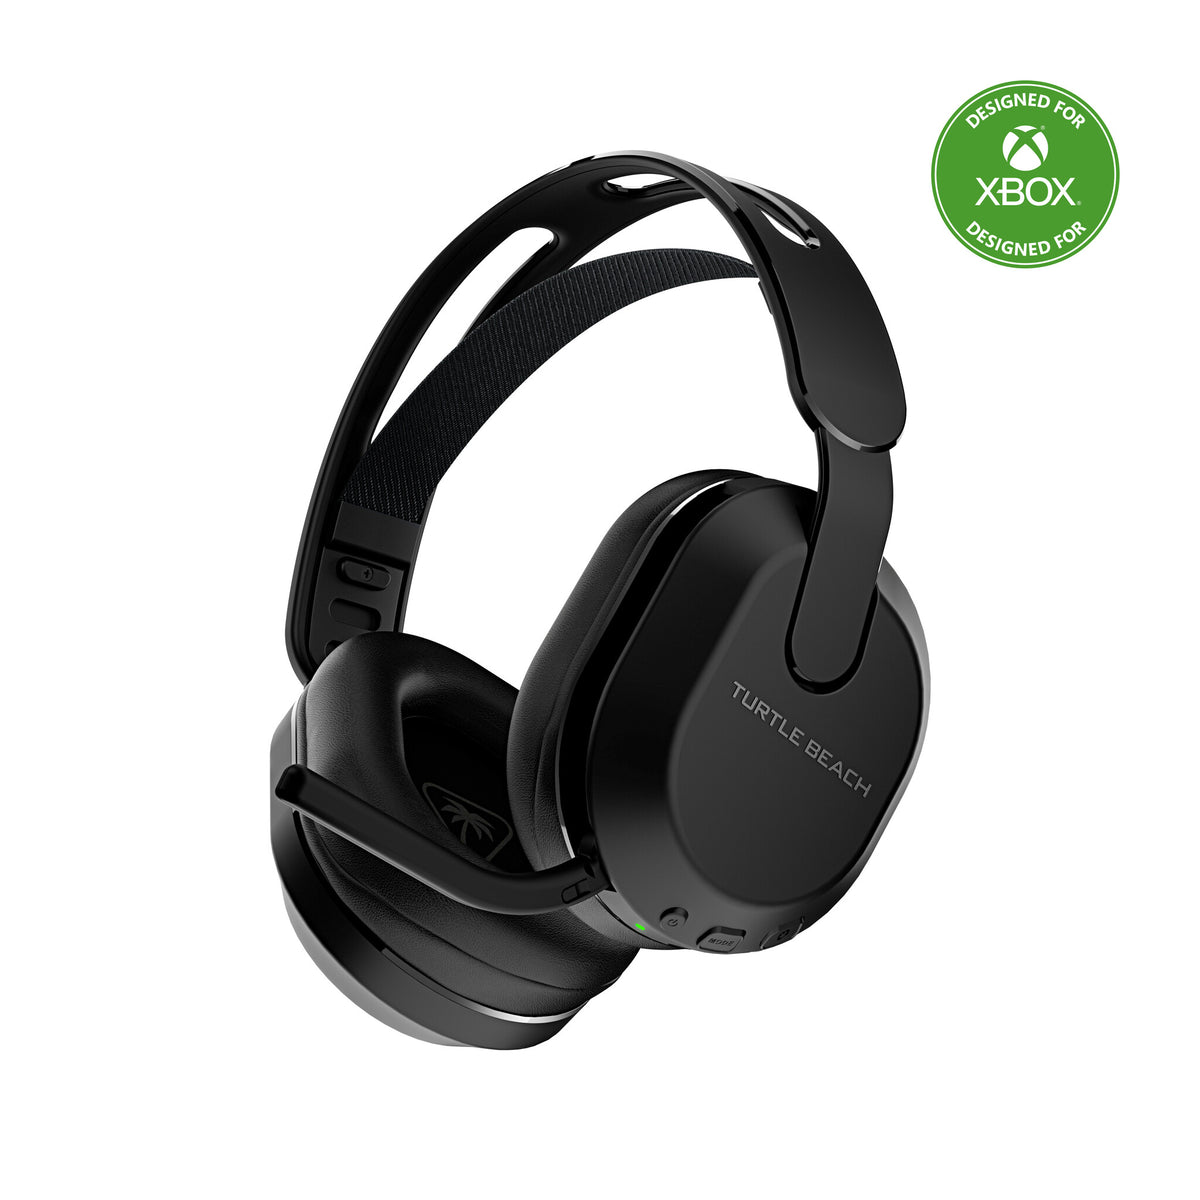 Turtle Beach Stealth 500 - Wireless Bluetooth Gaming Headset for Xbox Series X|S in Black